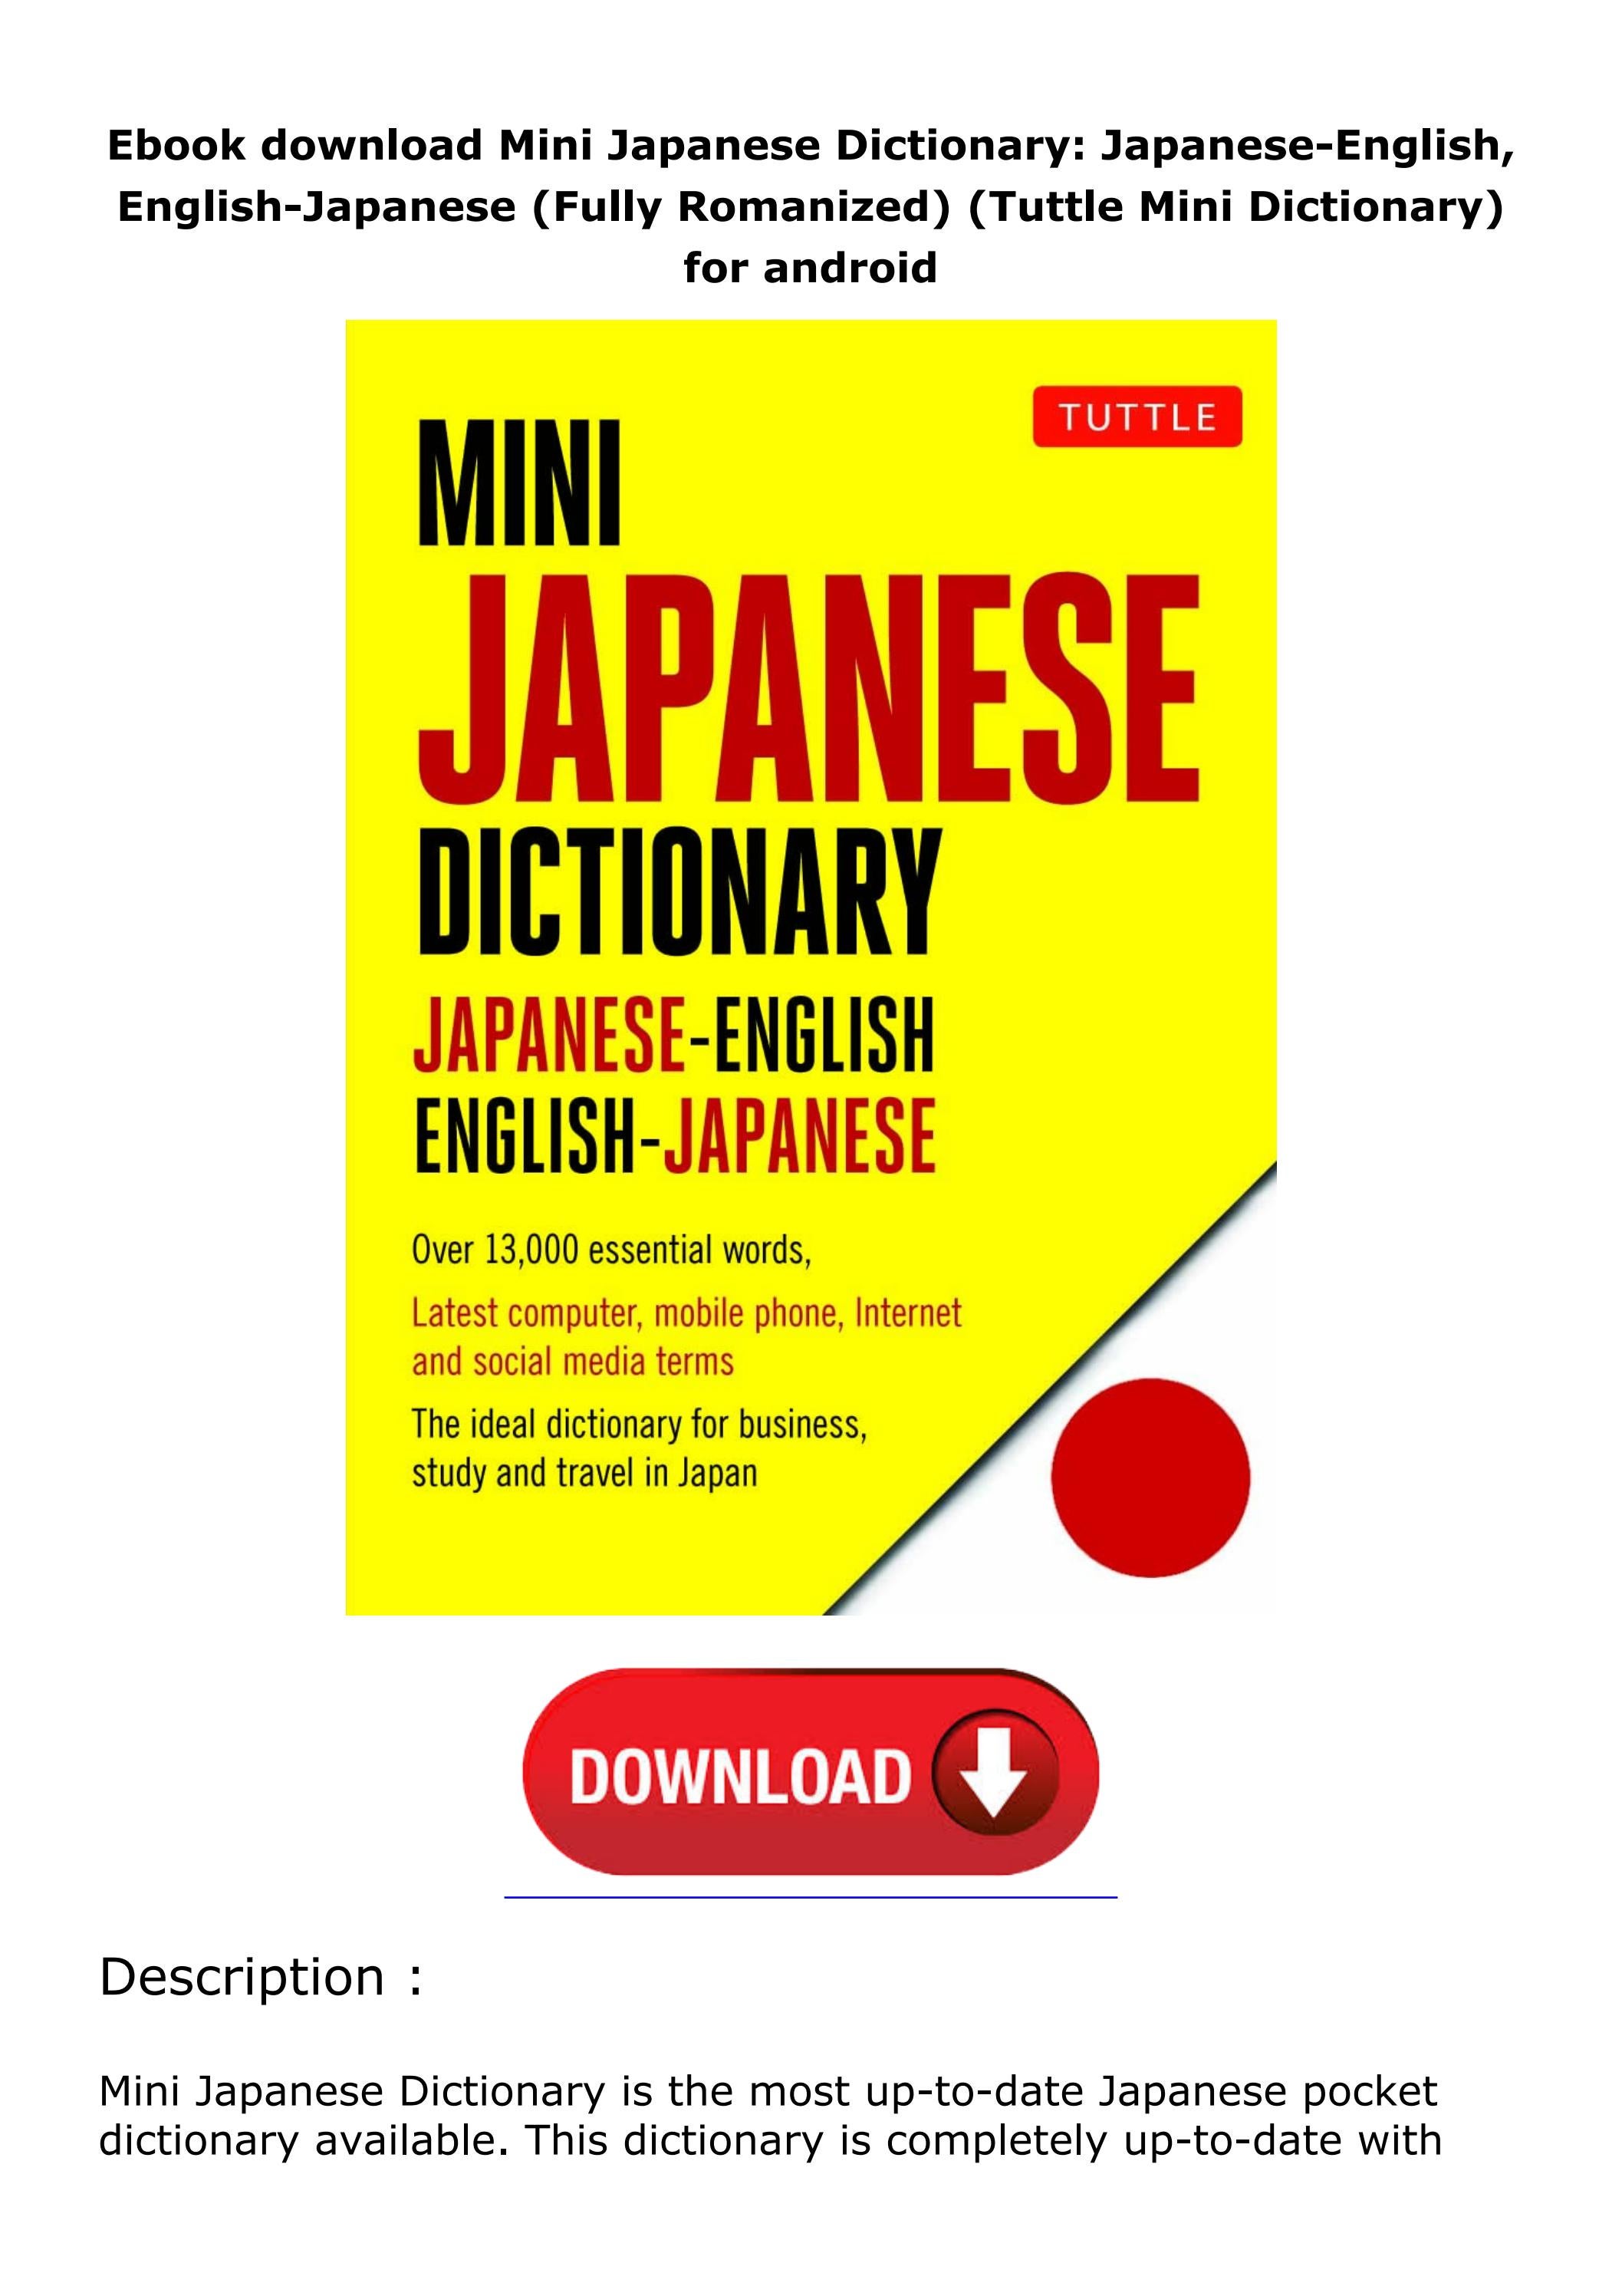 english japanese dictionary pdf free download